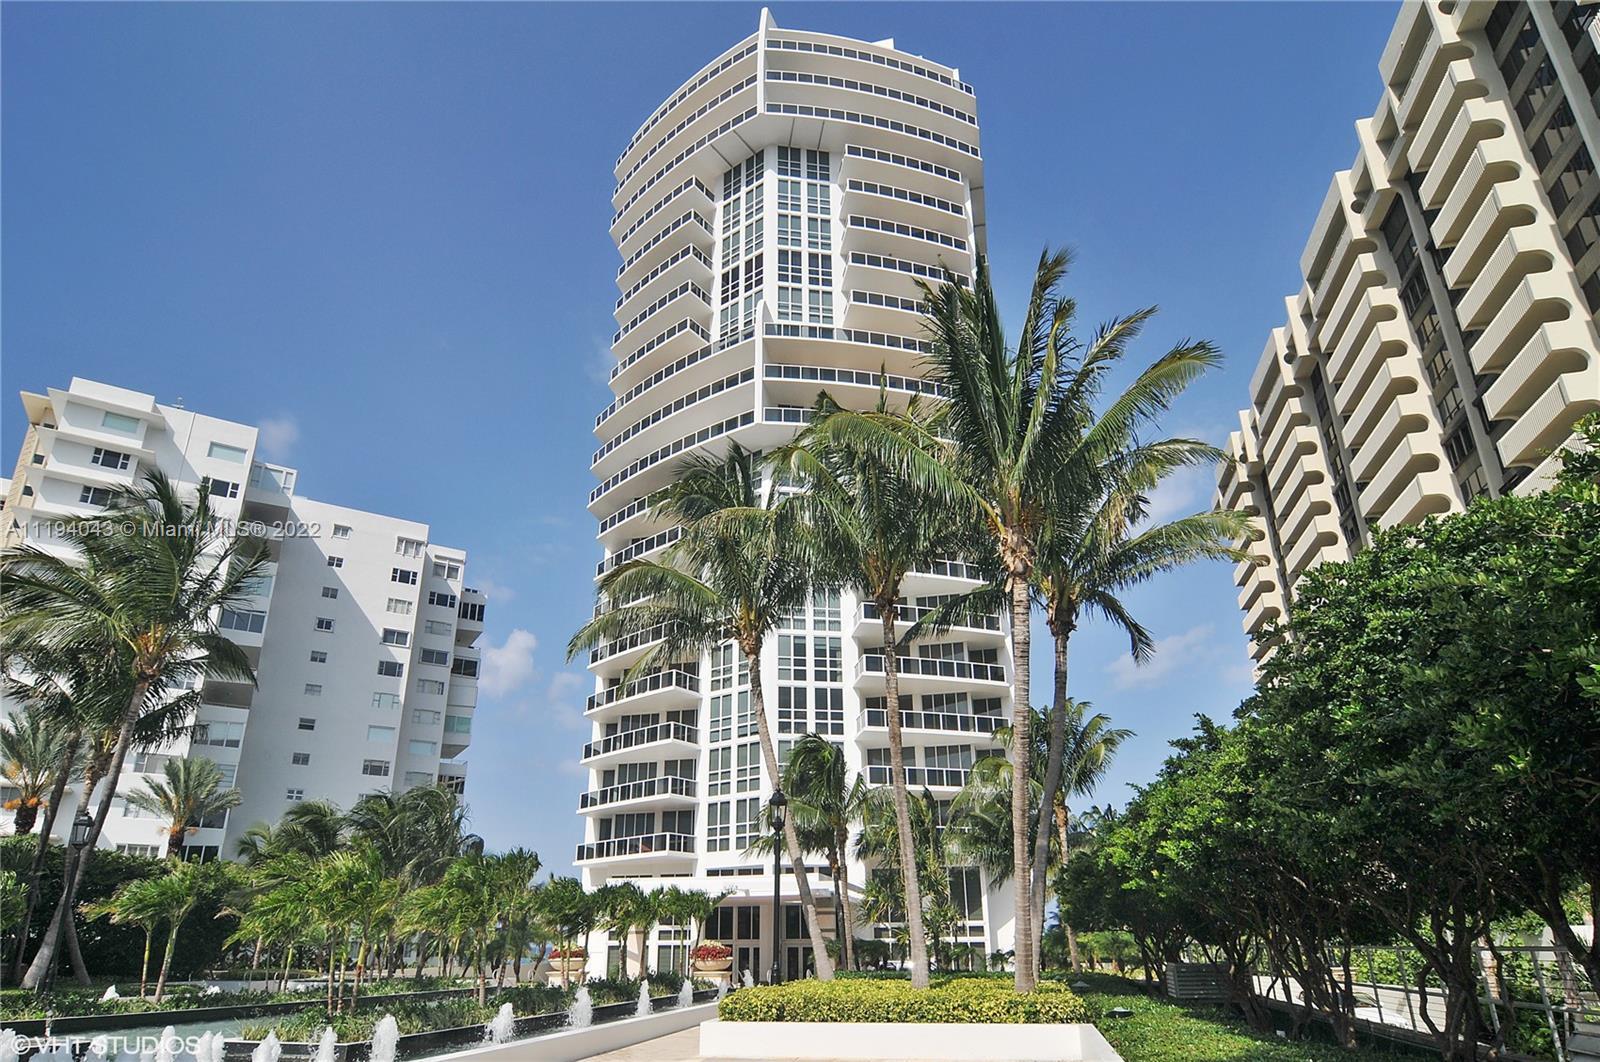 SOUGHT AFTER AND STUNNING BEACHFRONT LUXURY BELLINI BUILDING! THE BELLINI - LUXURIOUS & PRESTIGIOUS 